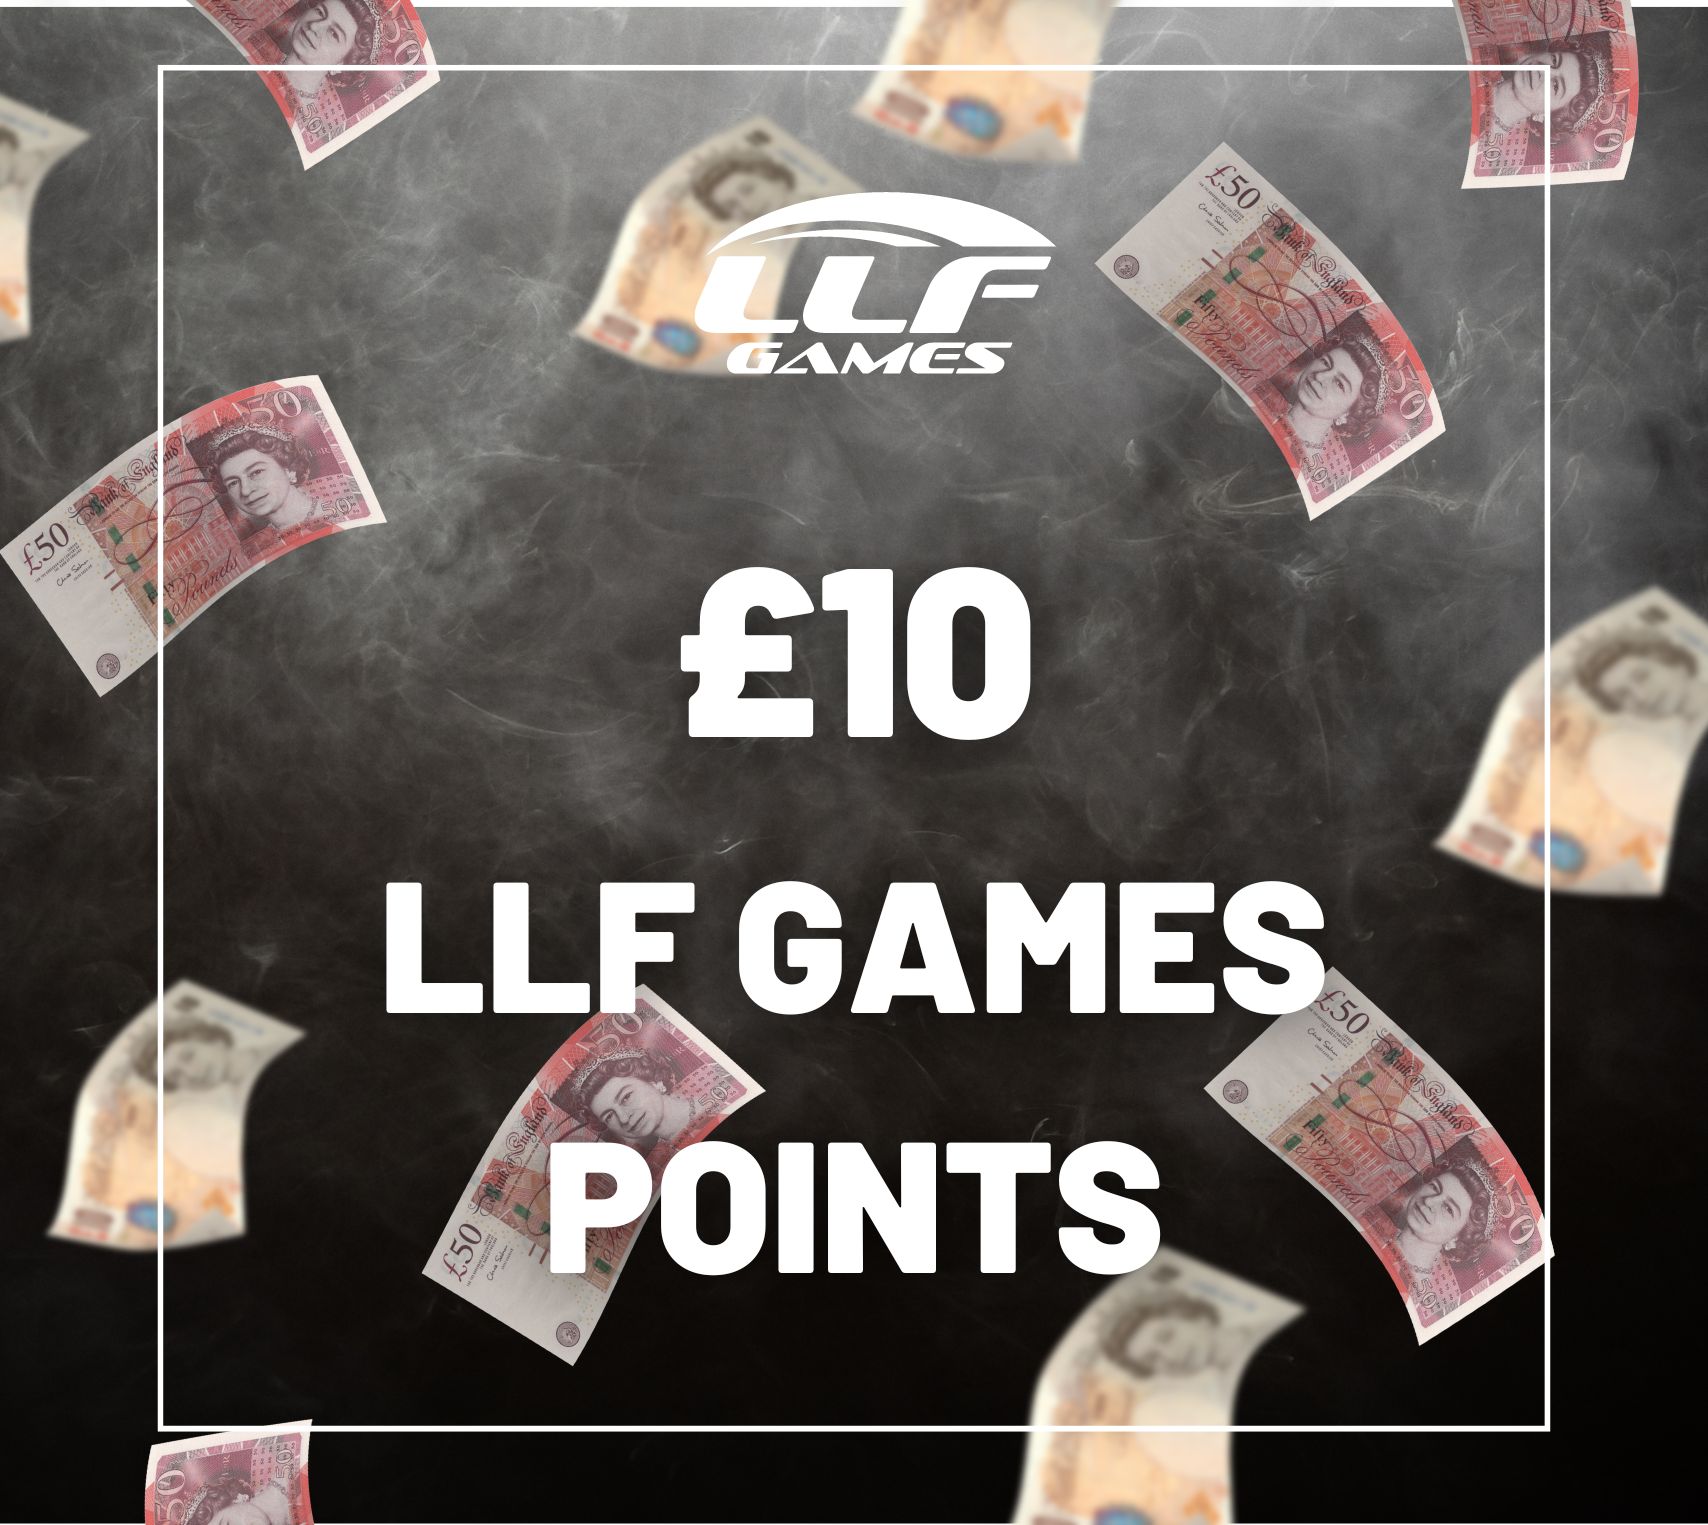 £10 LLF Points (Site Credit)